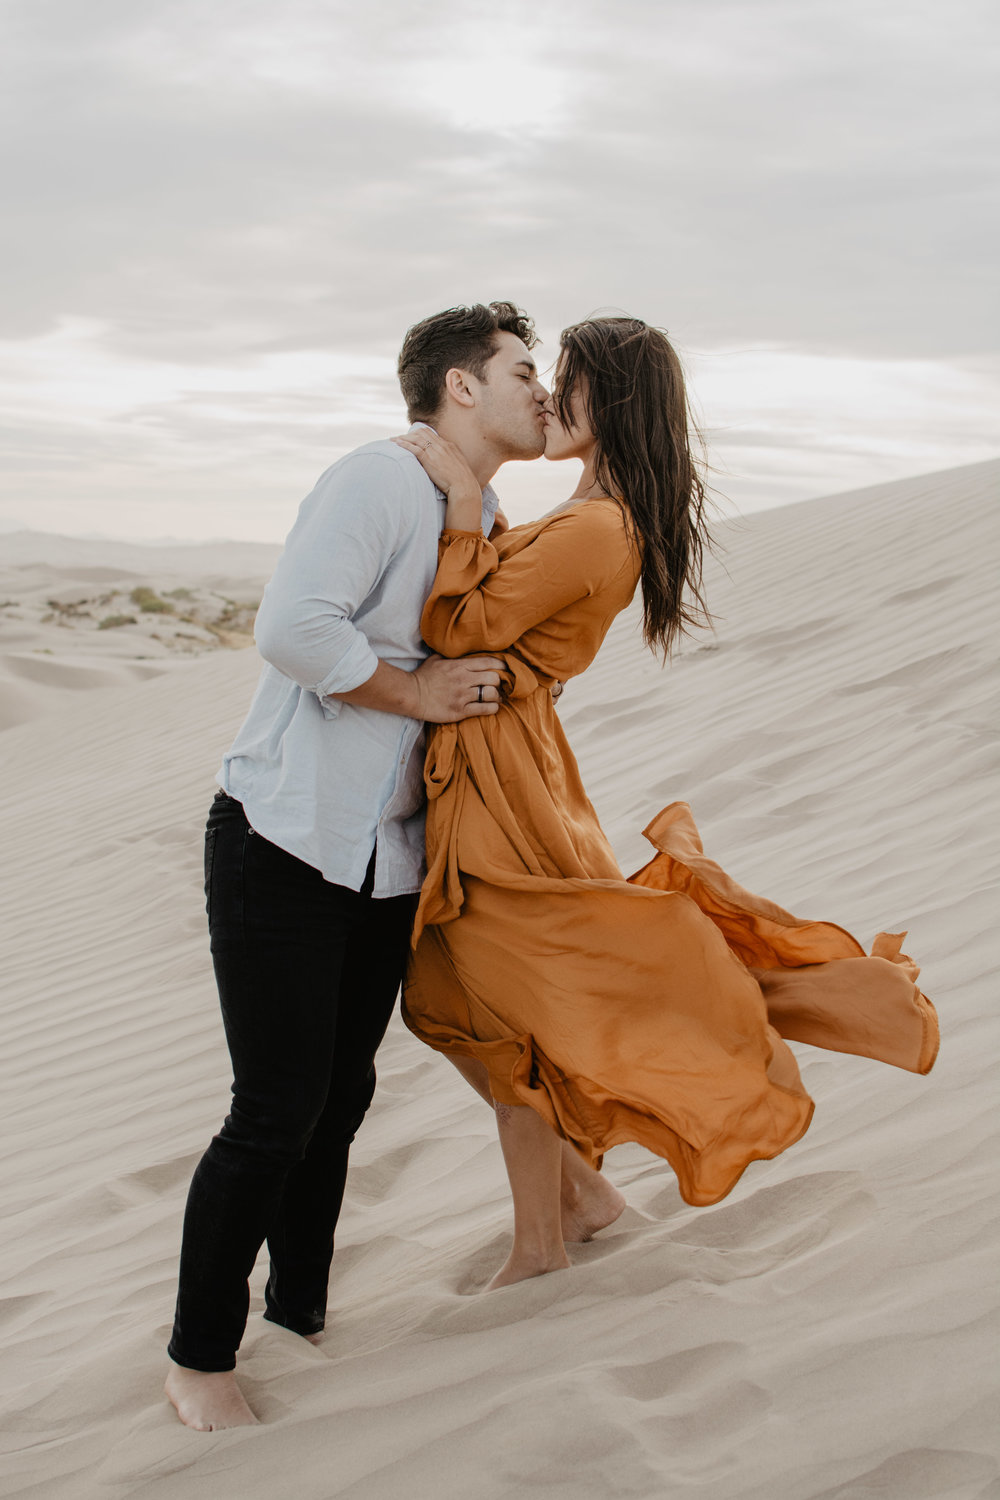 Jocilyn Bennett Photography | Engagement Pose Ideas | Destination Wedding Photographer | Elopement Wedding Photographer | National Park Elopement Photography | Capturing raw and genuine emotion | Utah Photographer | Utah wedding Photographer | National Park Weddings | Outfit ideas for engagements | Engagements with sand | Adventure Photographer | What to wear guide for engagement | Little Sahara engagements | Location ideas for engagements |